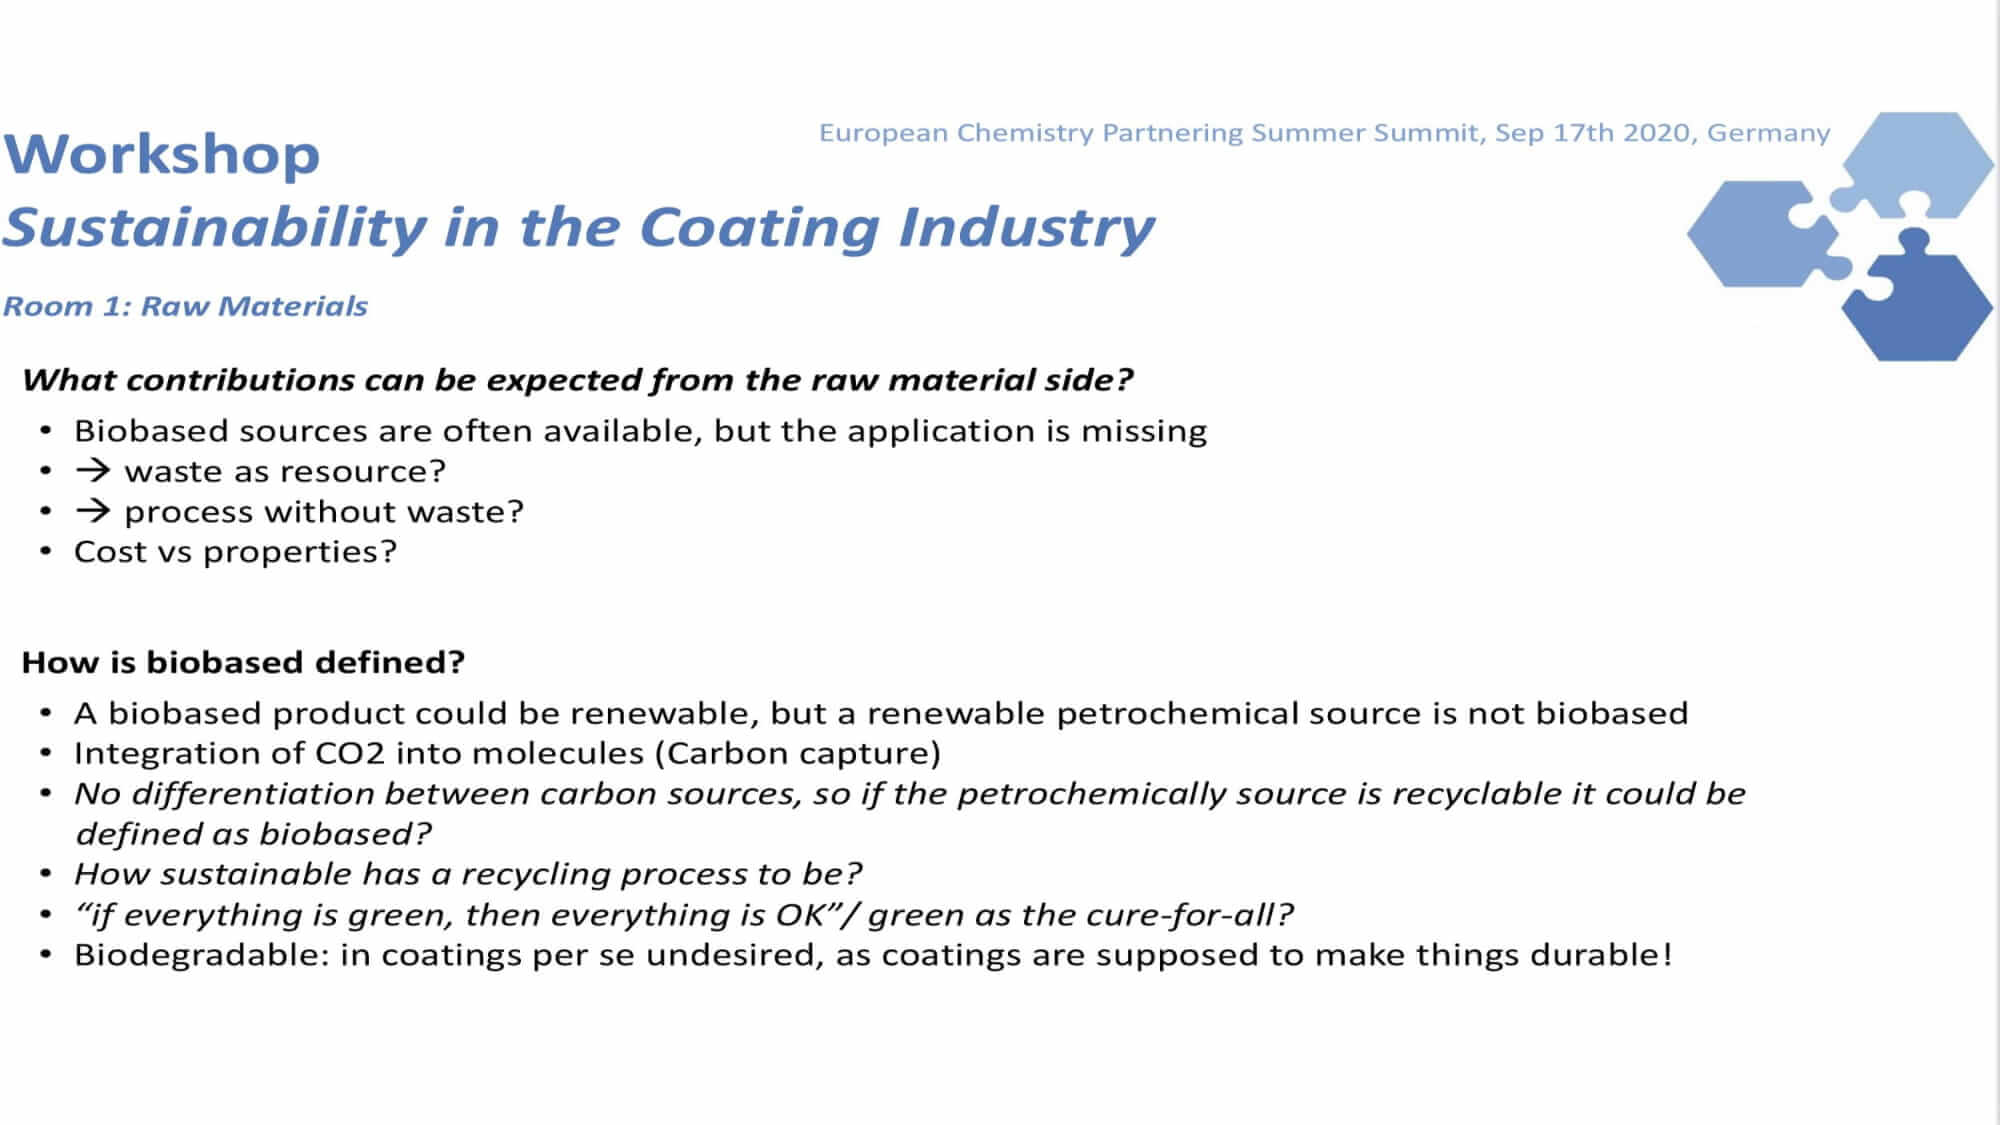 Had a chance to Judge, grade, Mentor and Certify the 3rd European Chemical Partnership Coating industry event